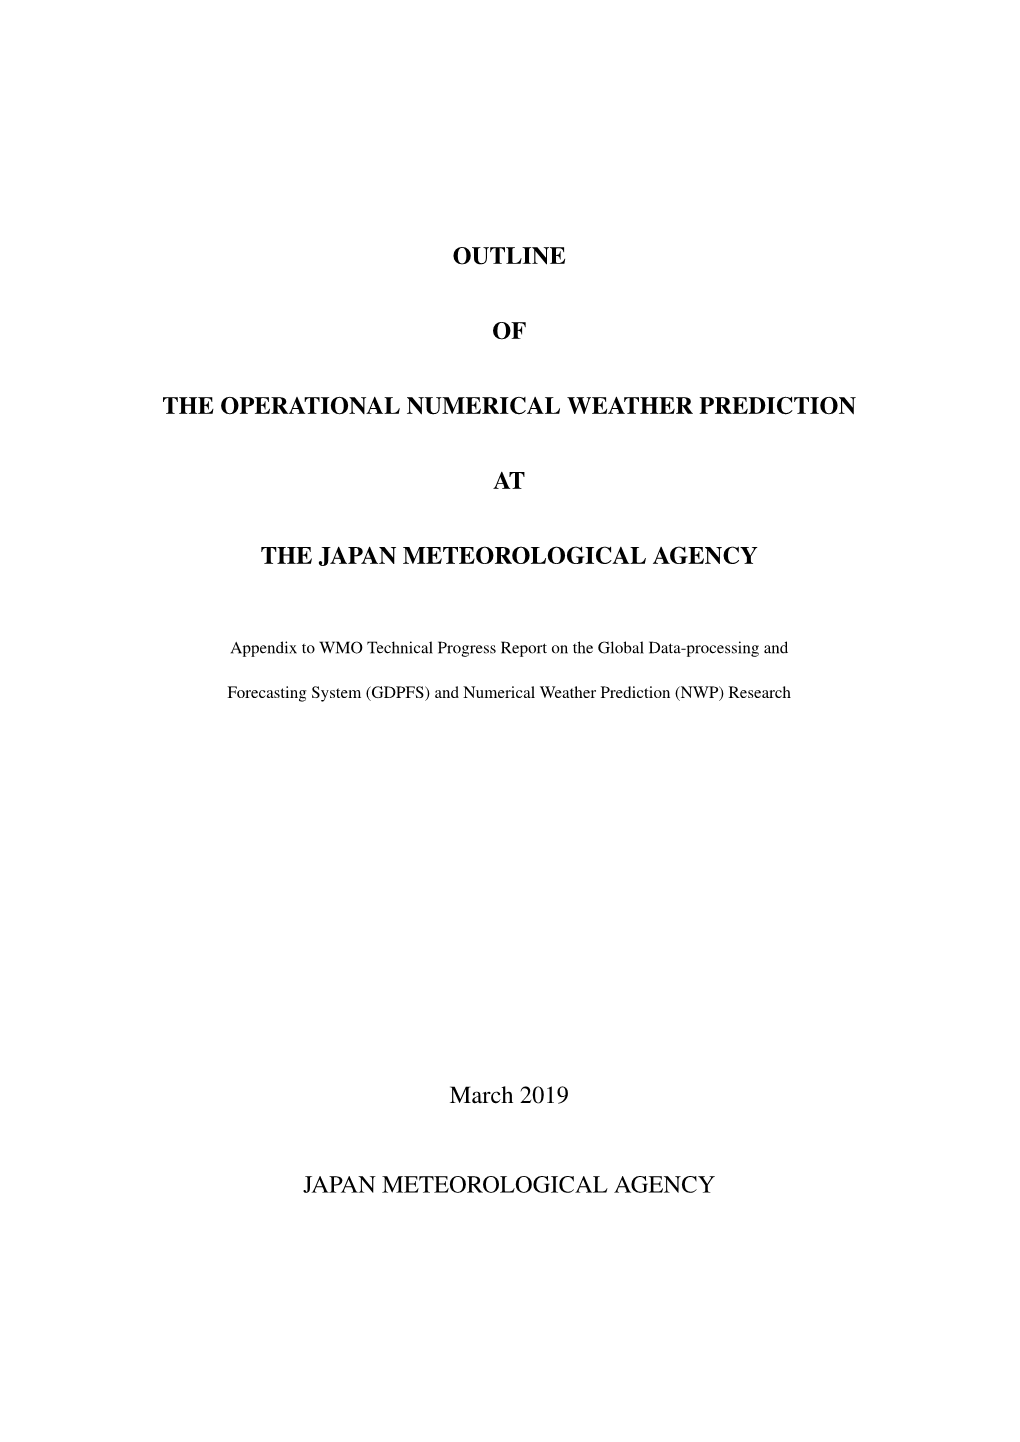 Outline of the Operational Numerical Weather Pre- Diction at the Japan Meteorological Agency